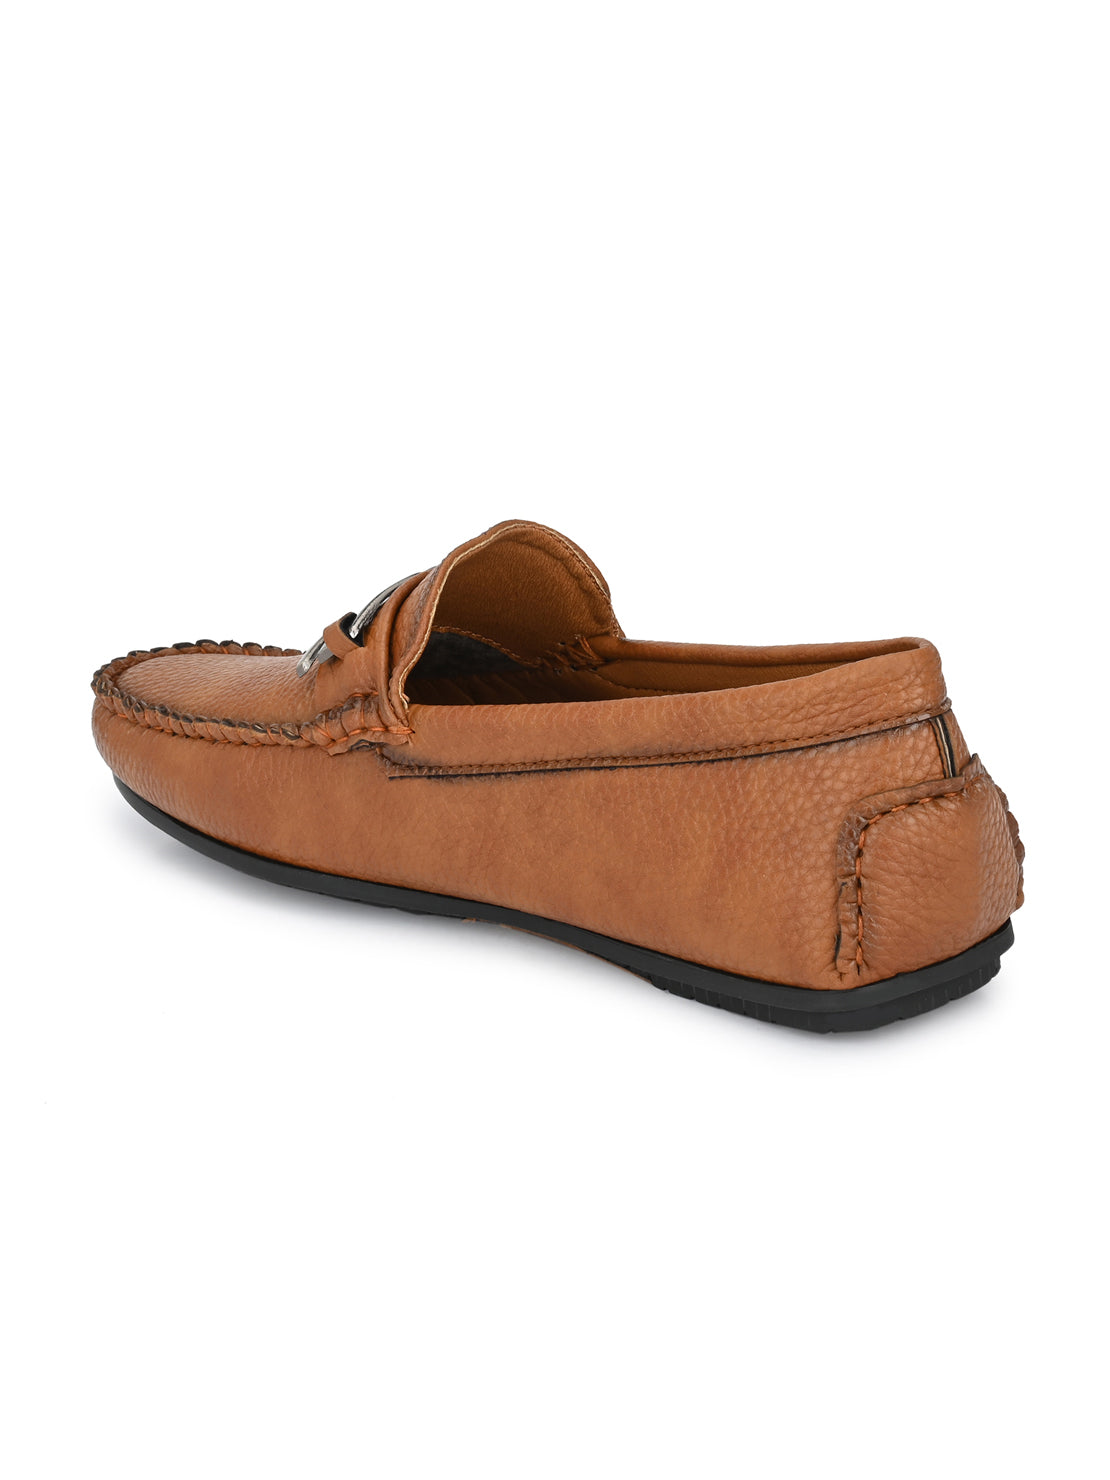 Guava Men's Tan Casual Slip On Driving Loafers (GV15JA766)